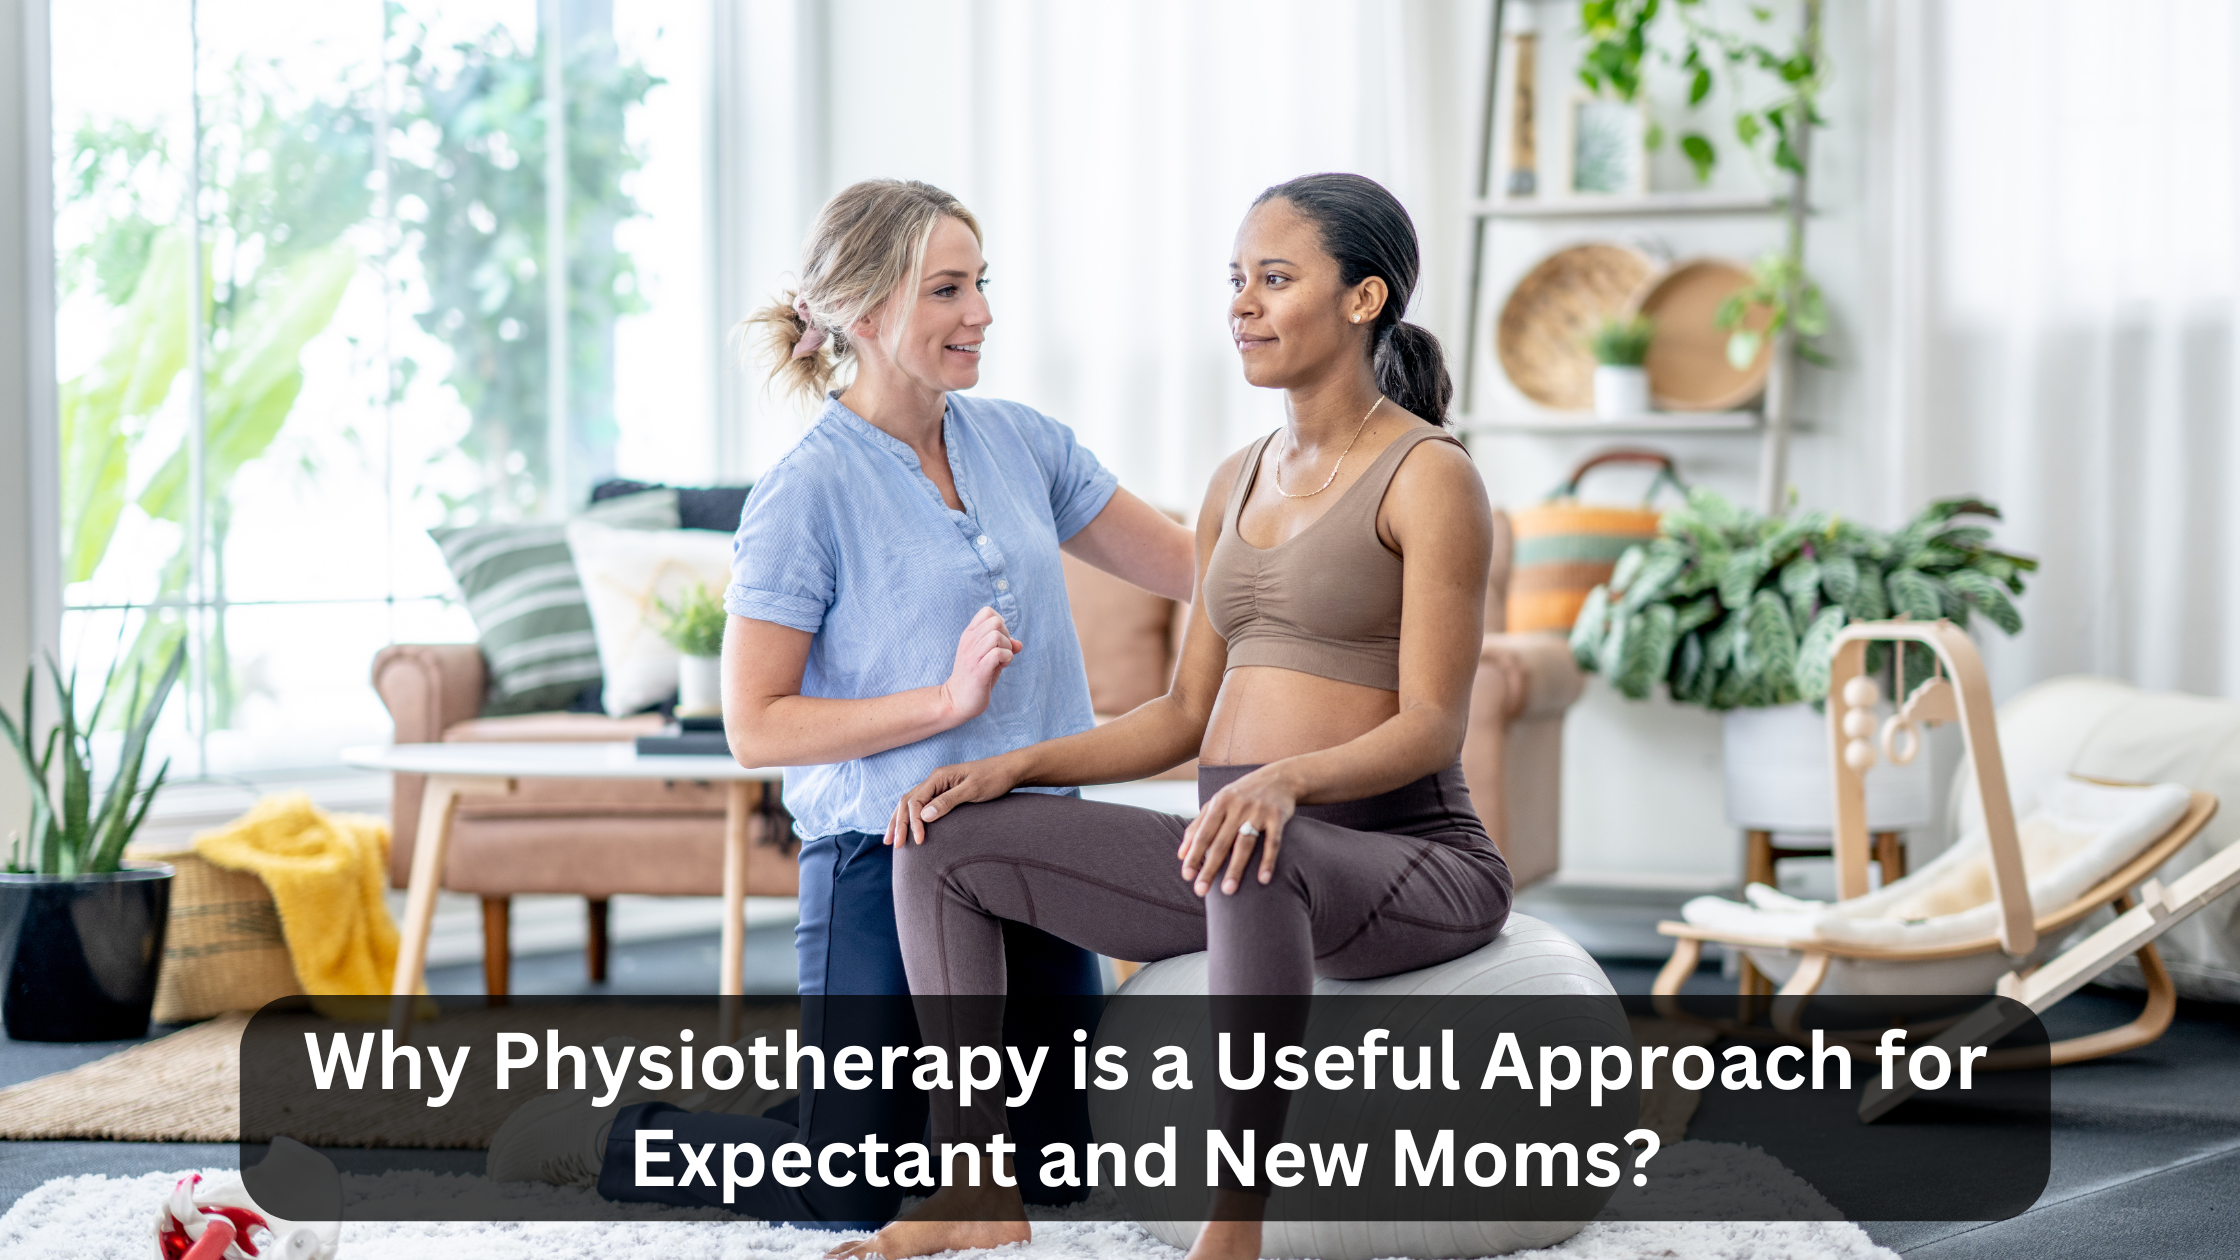 Why Physiotherapy is a Useful Approach for Expectant and New Moms?